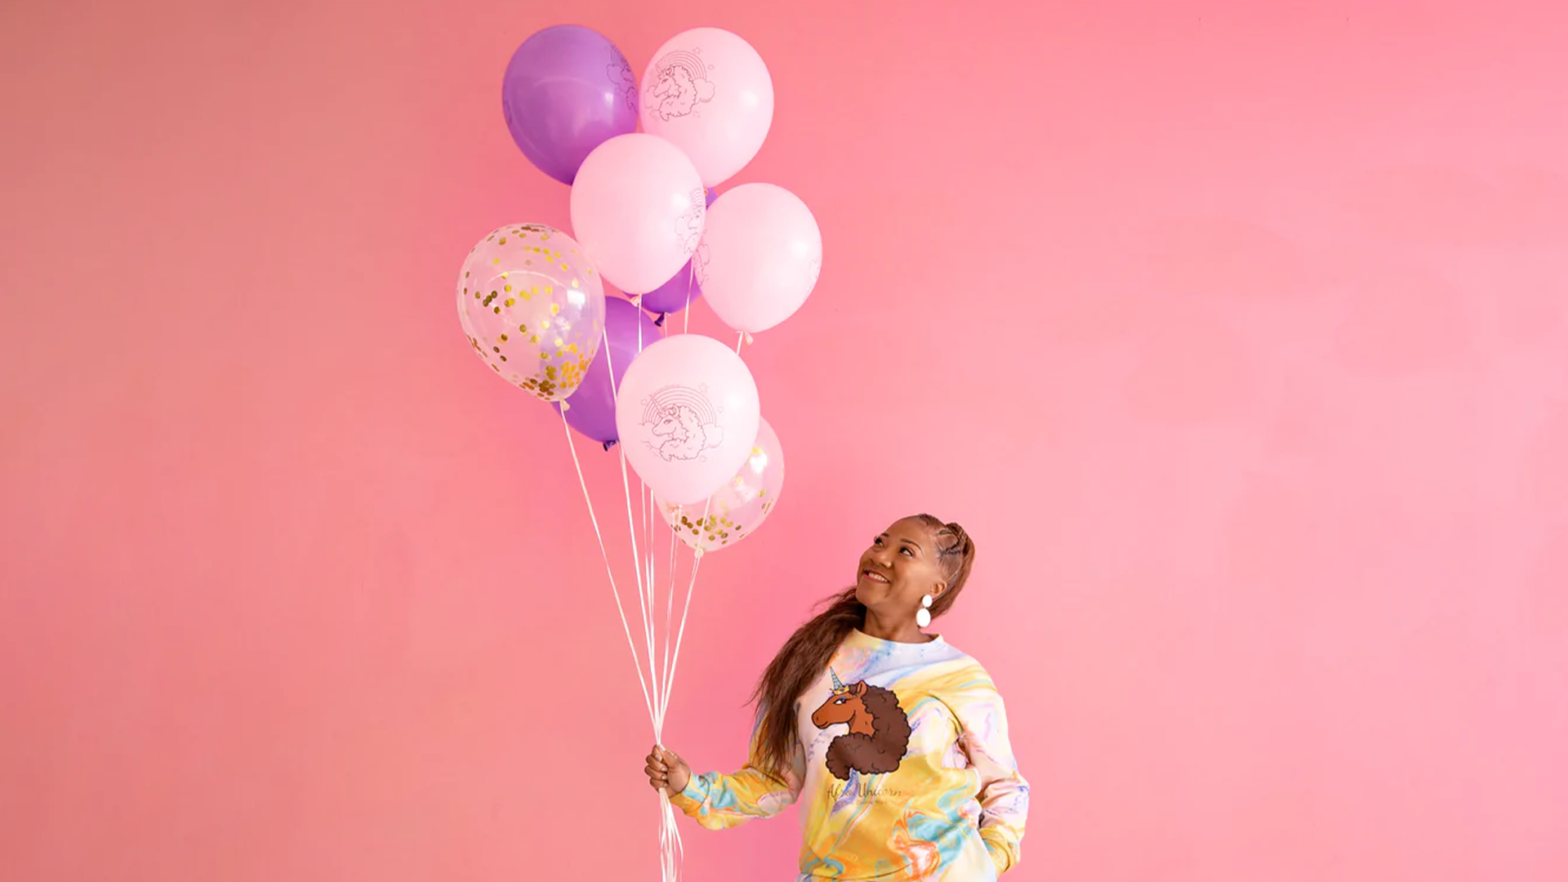 Black Woman-Owned Brand Afro Unicorn Becomes One Of The First To Join Forces With Walmart For Party Supplies